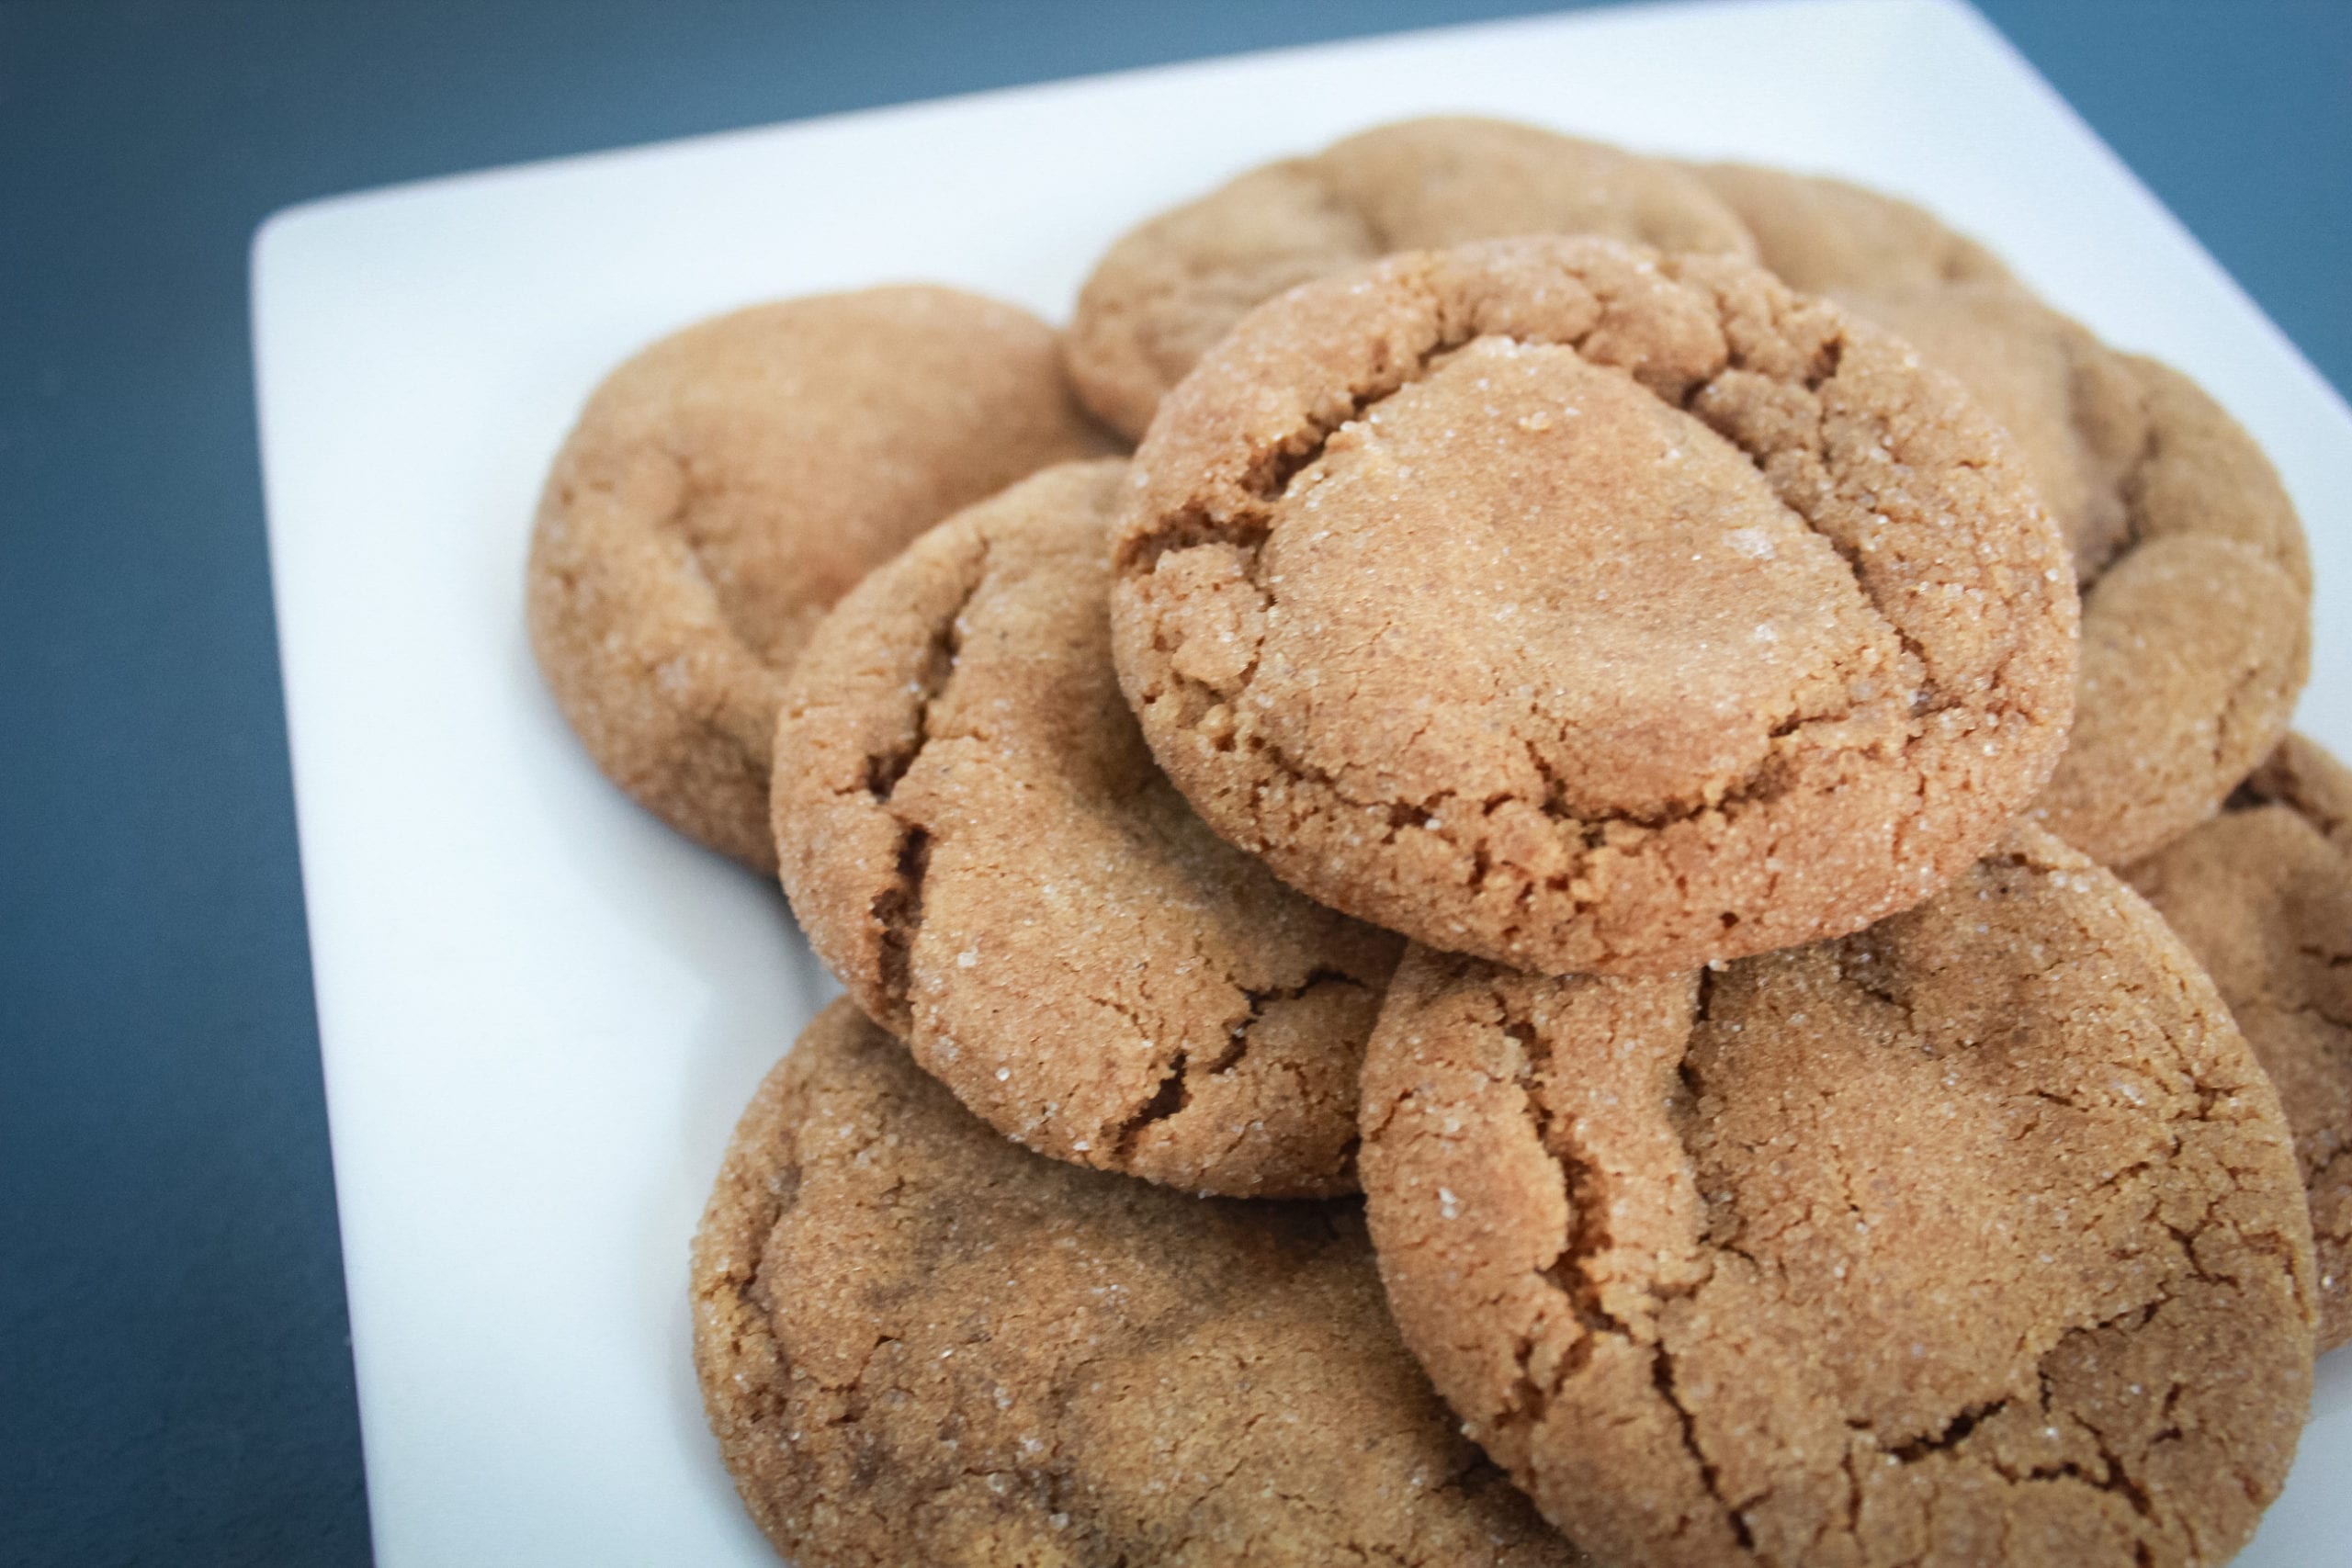 ginger snap cookies on white plate